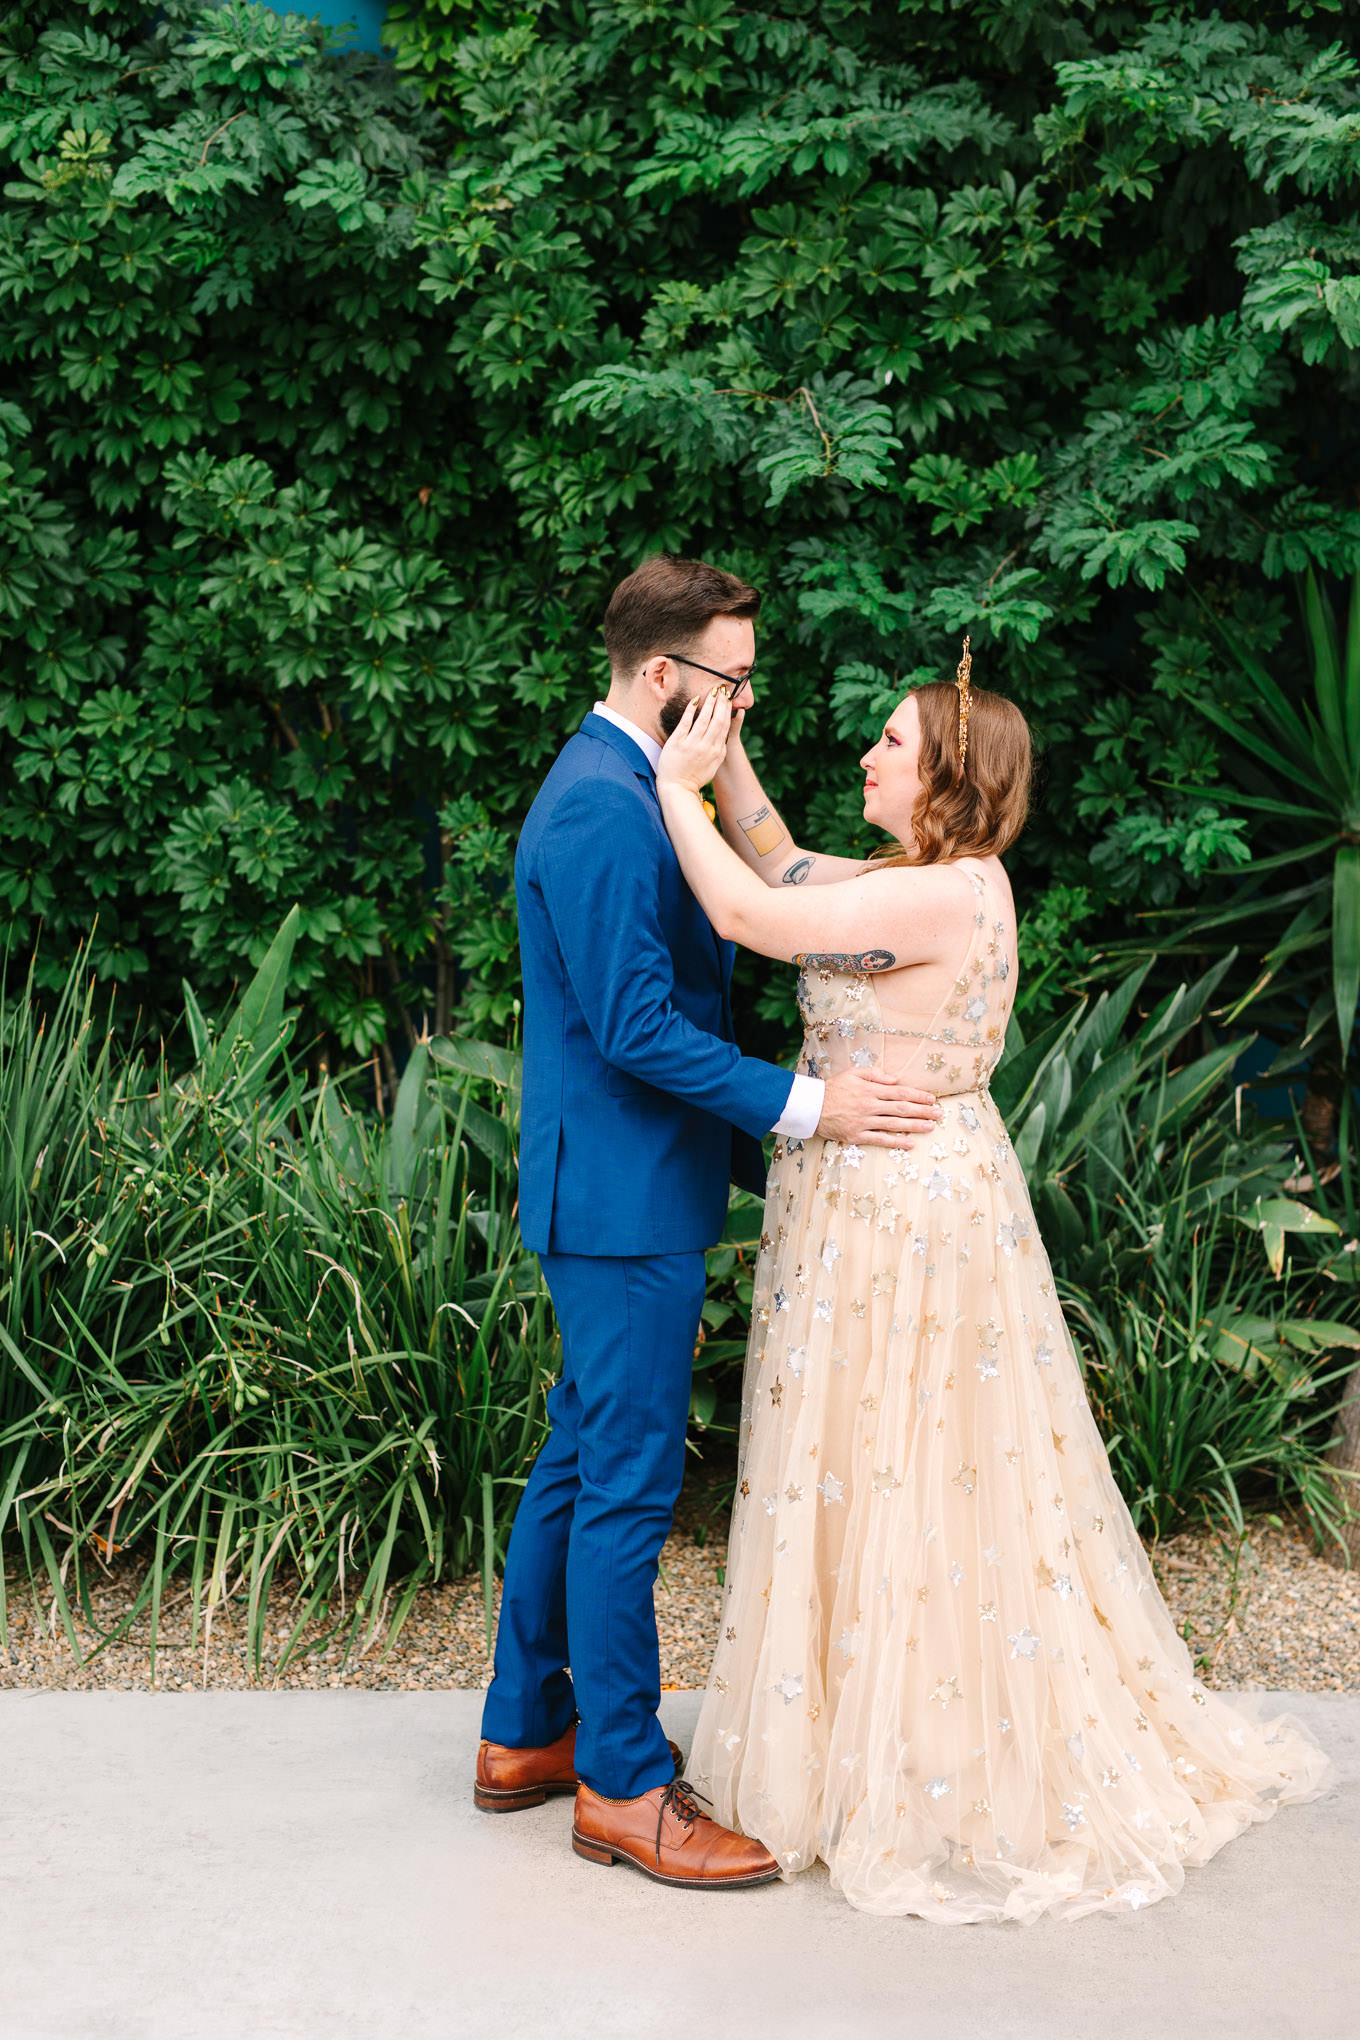 First look between bride and groom | Colorful Downtown Los Angeles Valentine Wedding | Los Angeles wedding photographer | #losangeleswedding #colorfulwedding #DTLA #valentinedtla   Source: Mary Costa Photography | Los Angeles